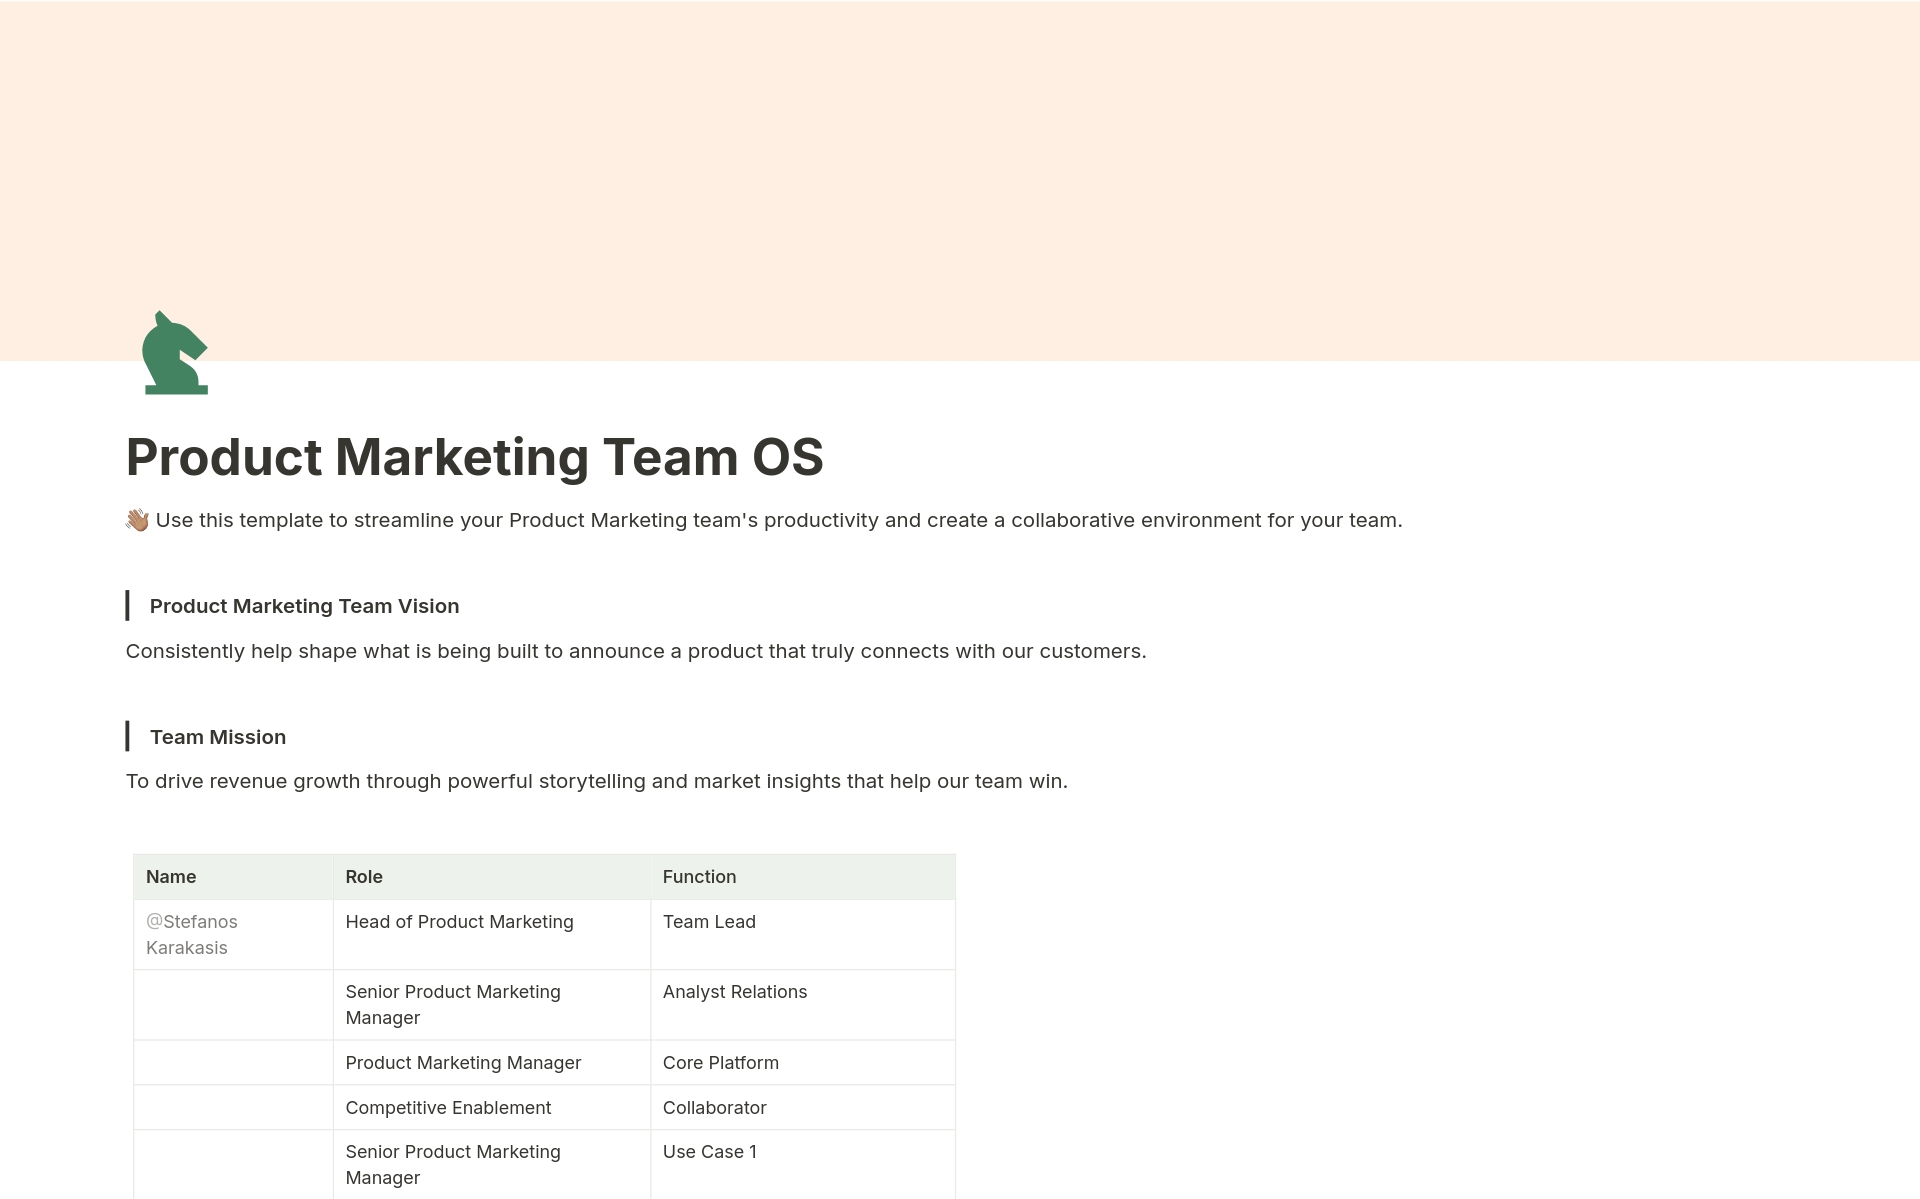 The Product Marketing Team OS template is your go-to tool for an efficient Go-To-Market motion. This all-in-one platform combines all the vital elements of your product marketing strategy, from competitive enablement to product launch tracking, your team is good to go.